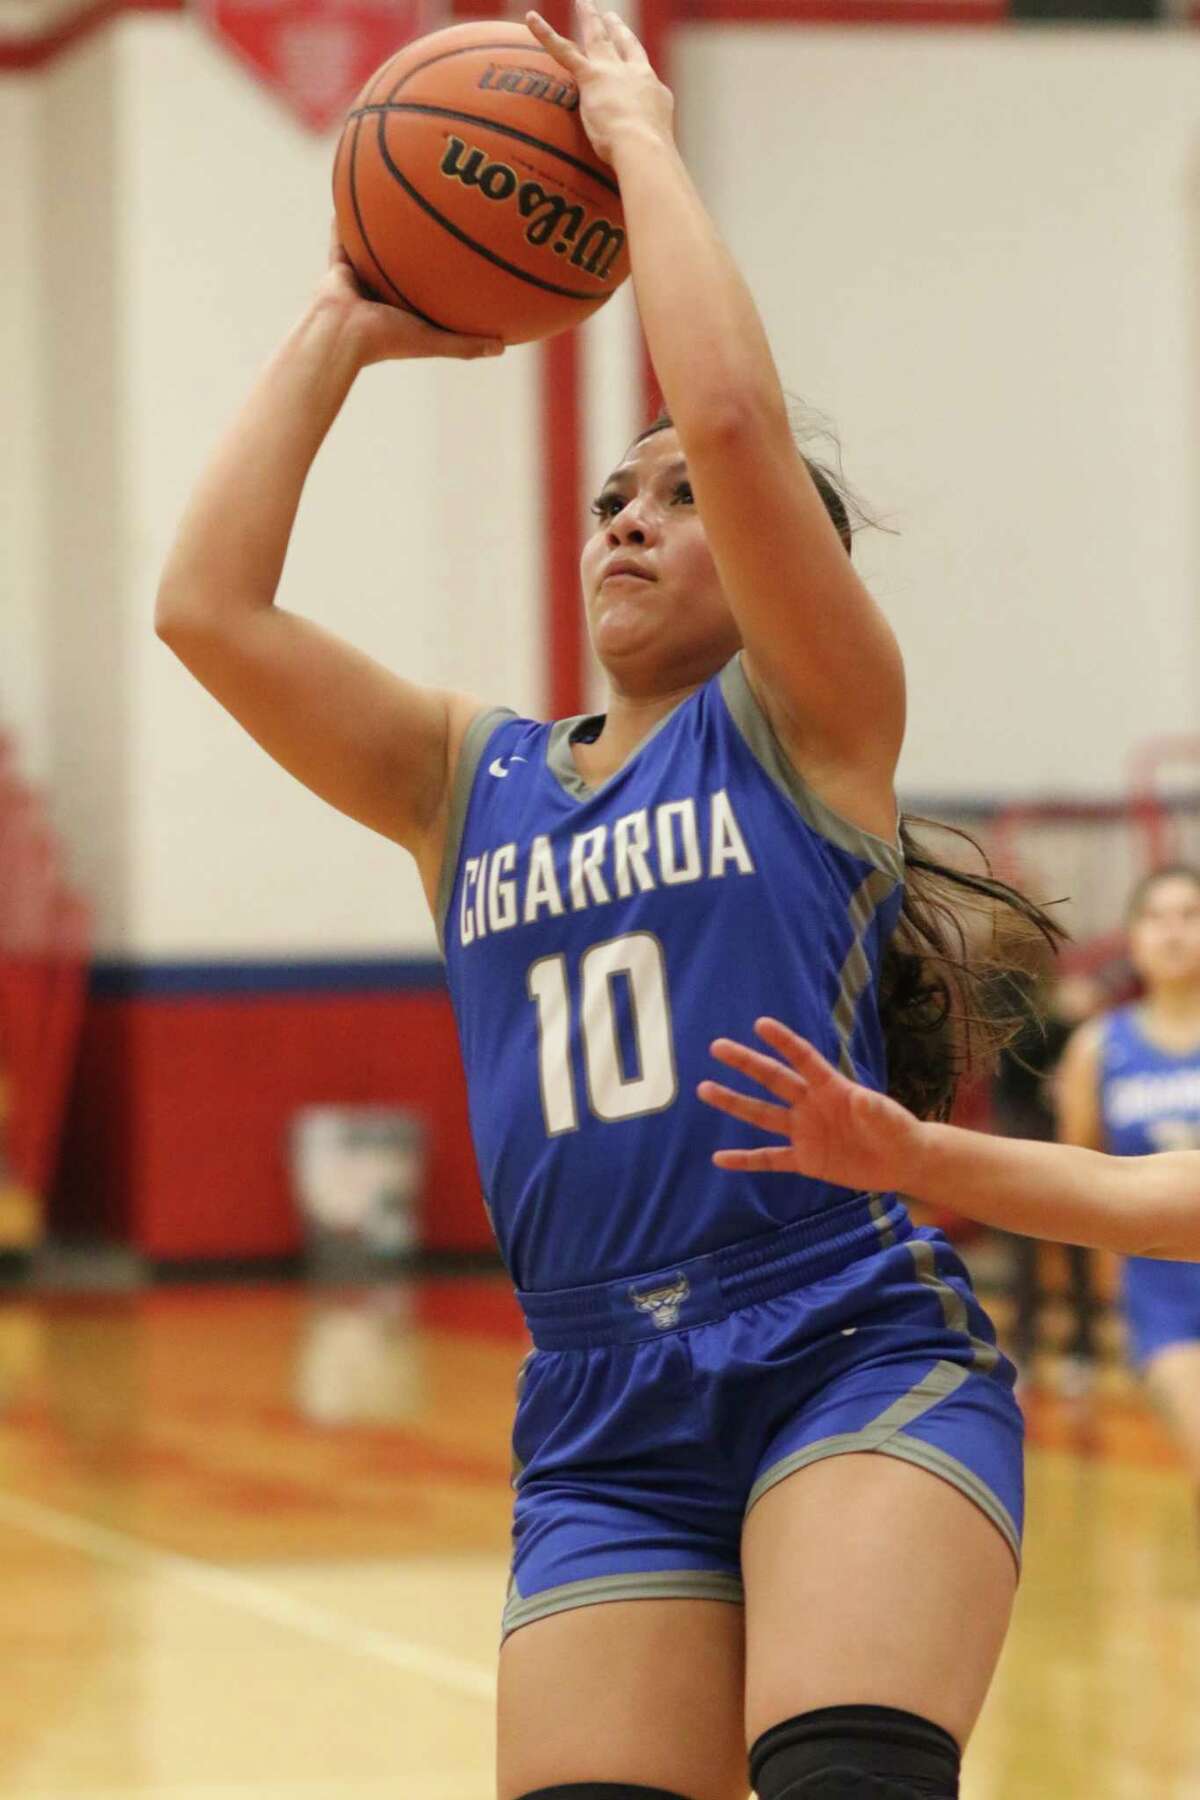 Cigarroa’s Alexis Ramirez puts up a shot in the paint in the Lady Toros’ matchup with Martin on Jan. 11, 2022.